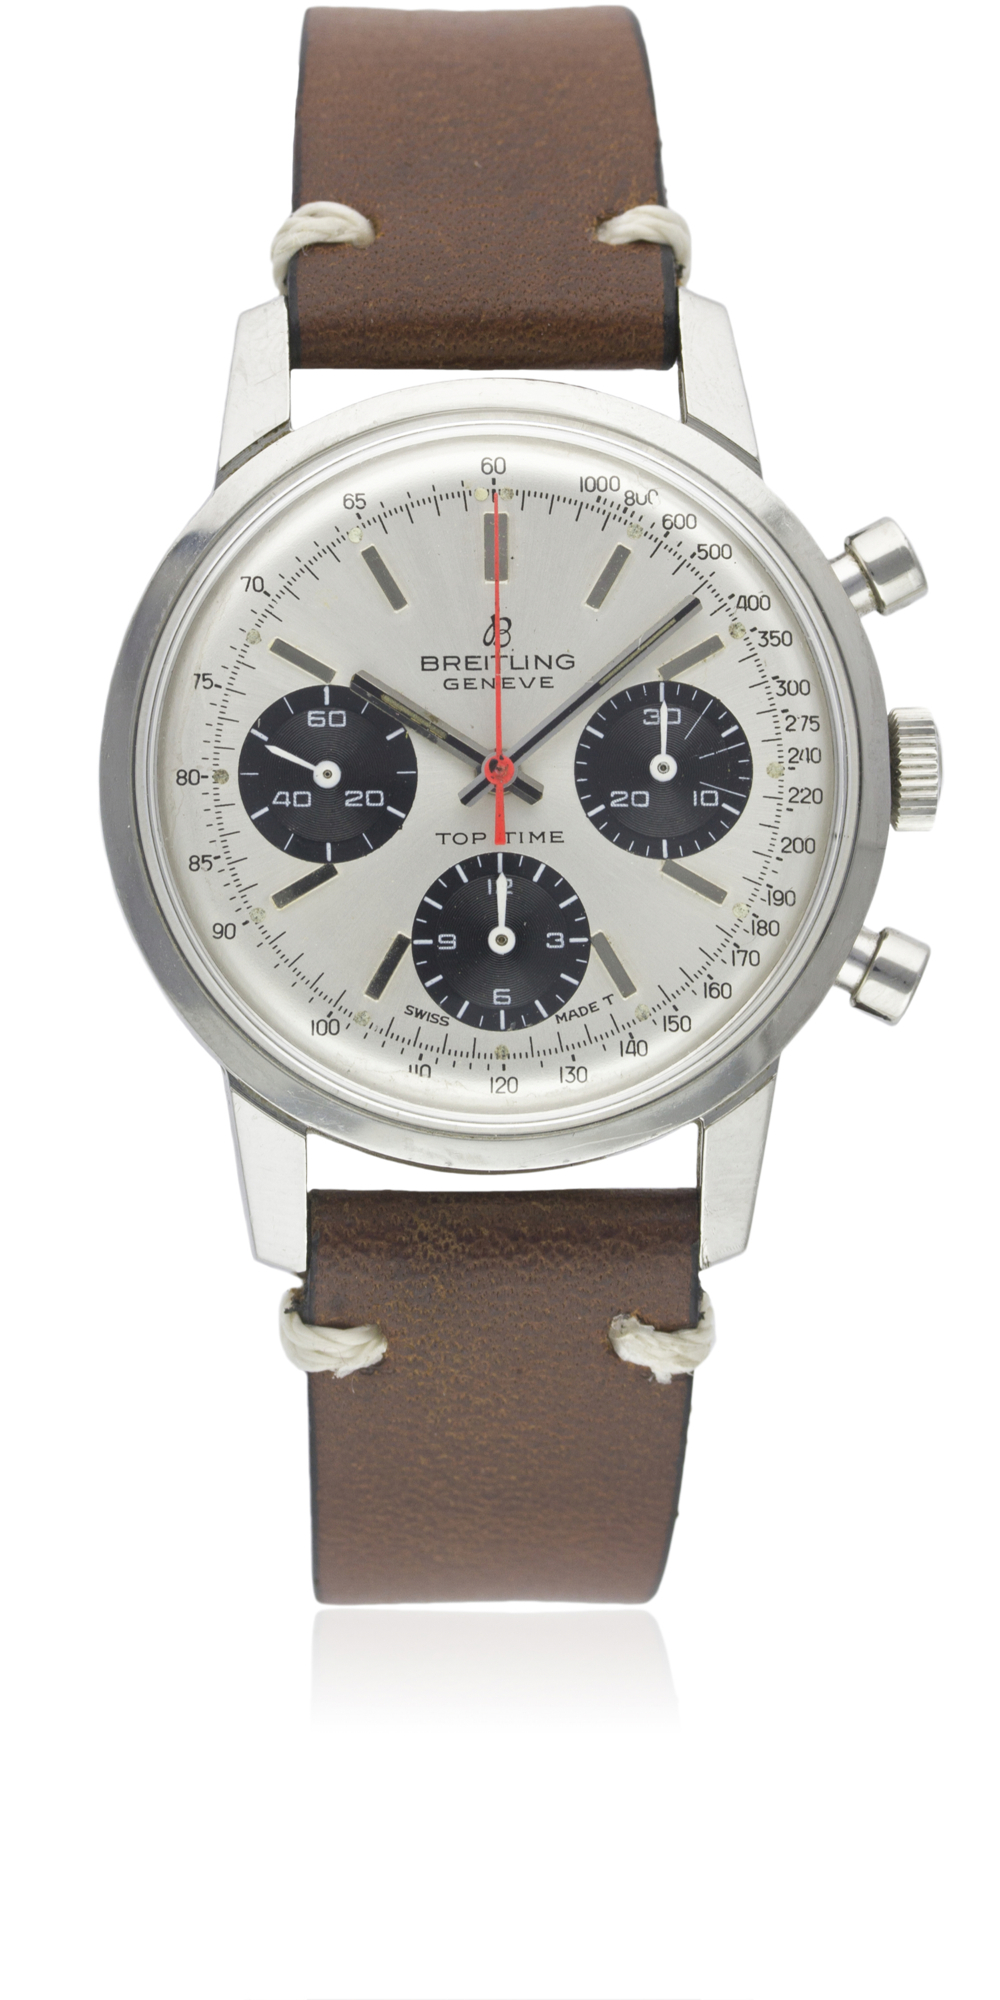 A RARE GENTLEMAN'S STAINLESS STEEL BREITLING TOP TIME CHRONOGRAPH WRIST WATCH CIRCA 1969, REF. 810 - Image 2 of 2